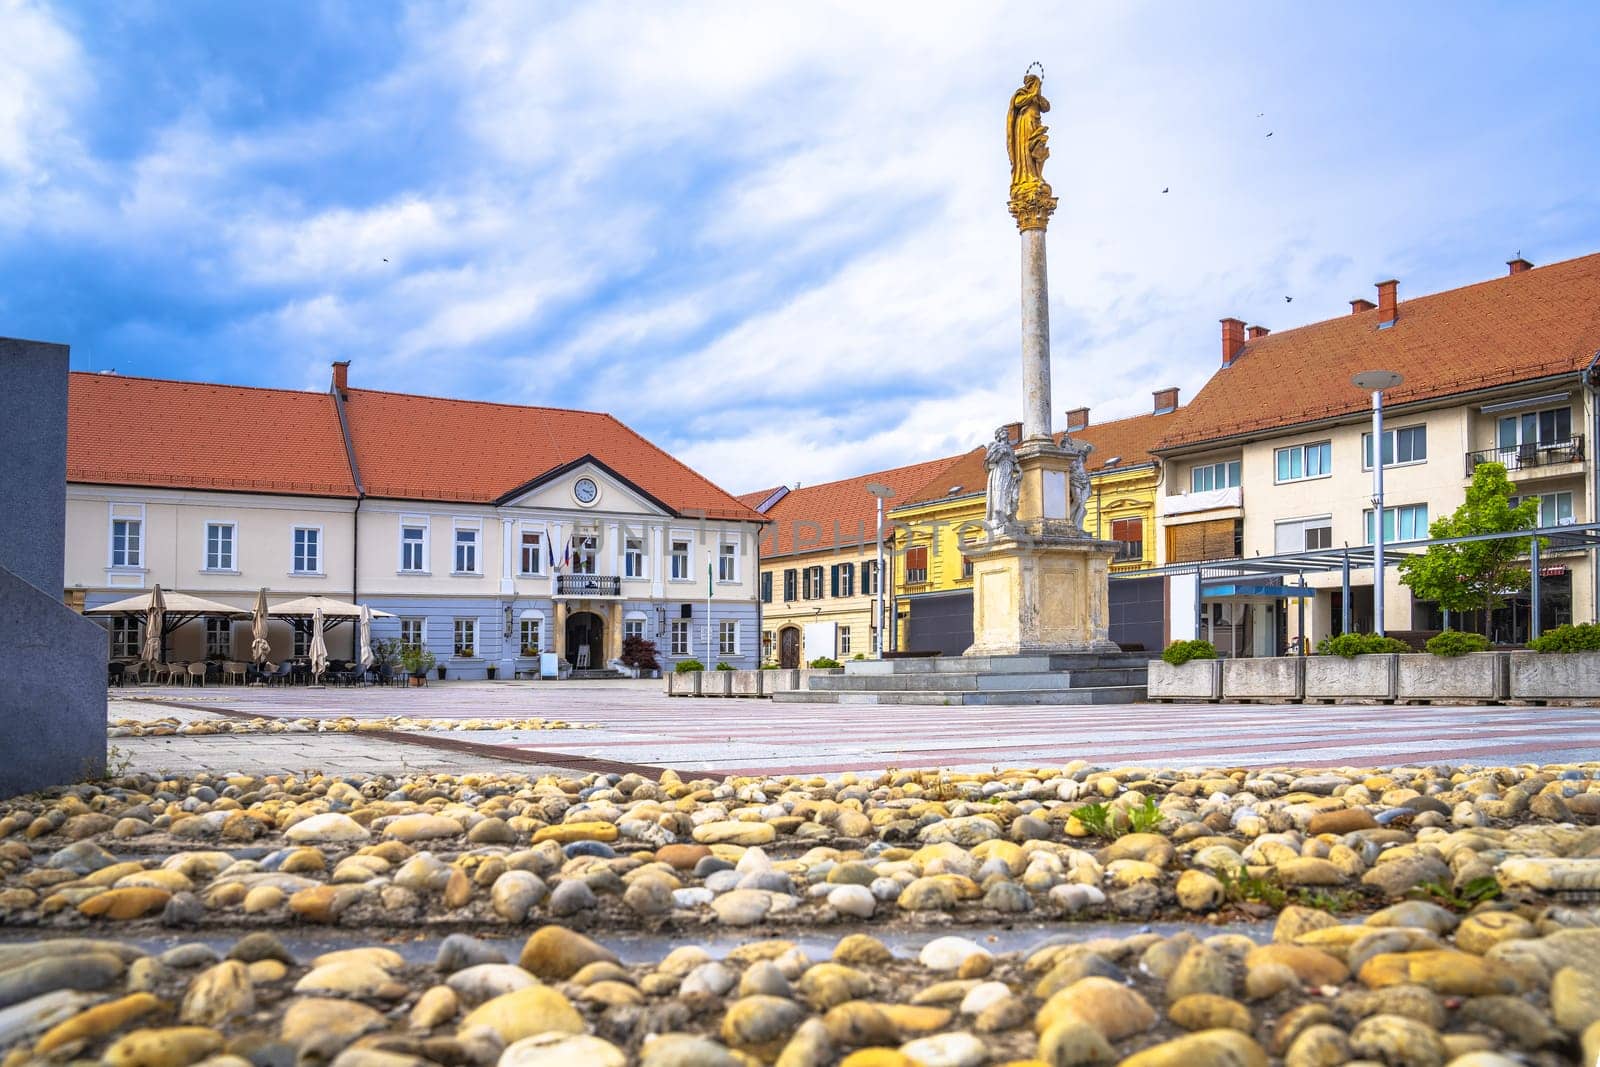 Town of Ljutomer central square view, northeastern Slovenia